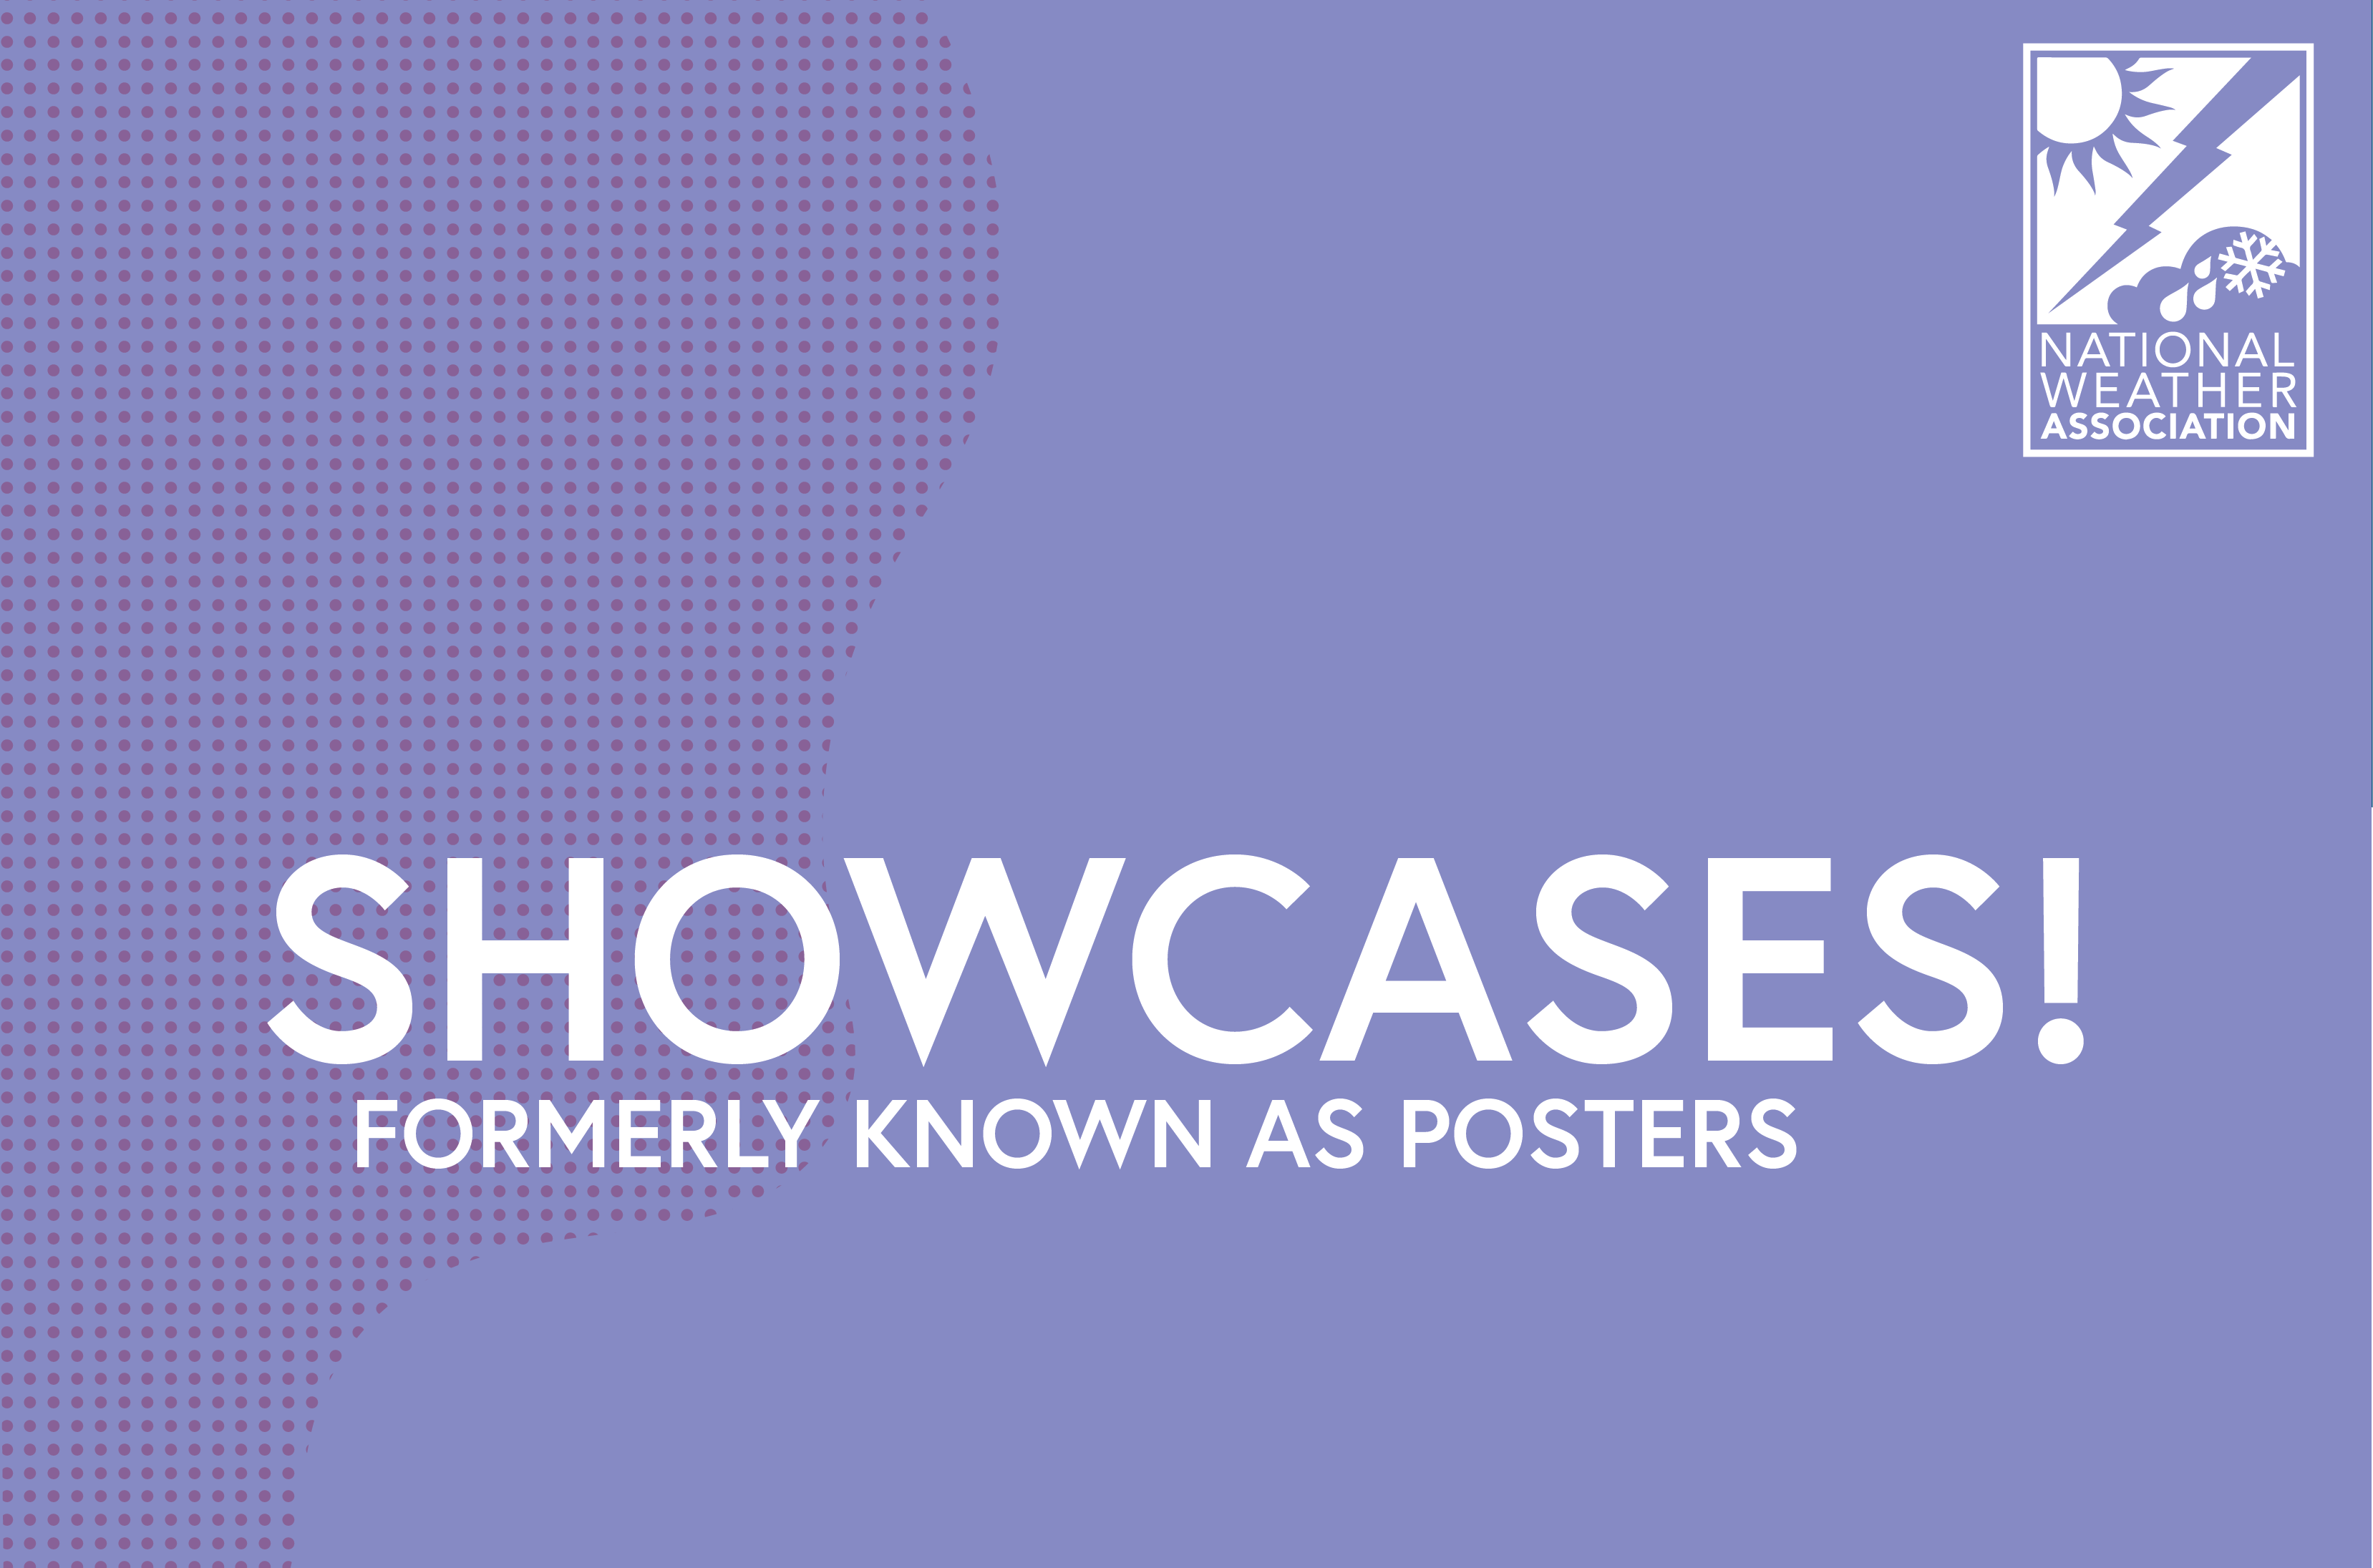 Showcases! Formerly known as posters. 